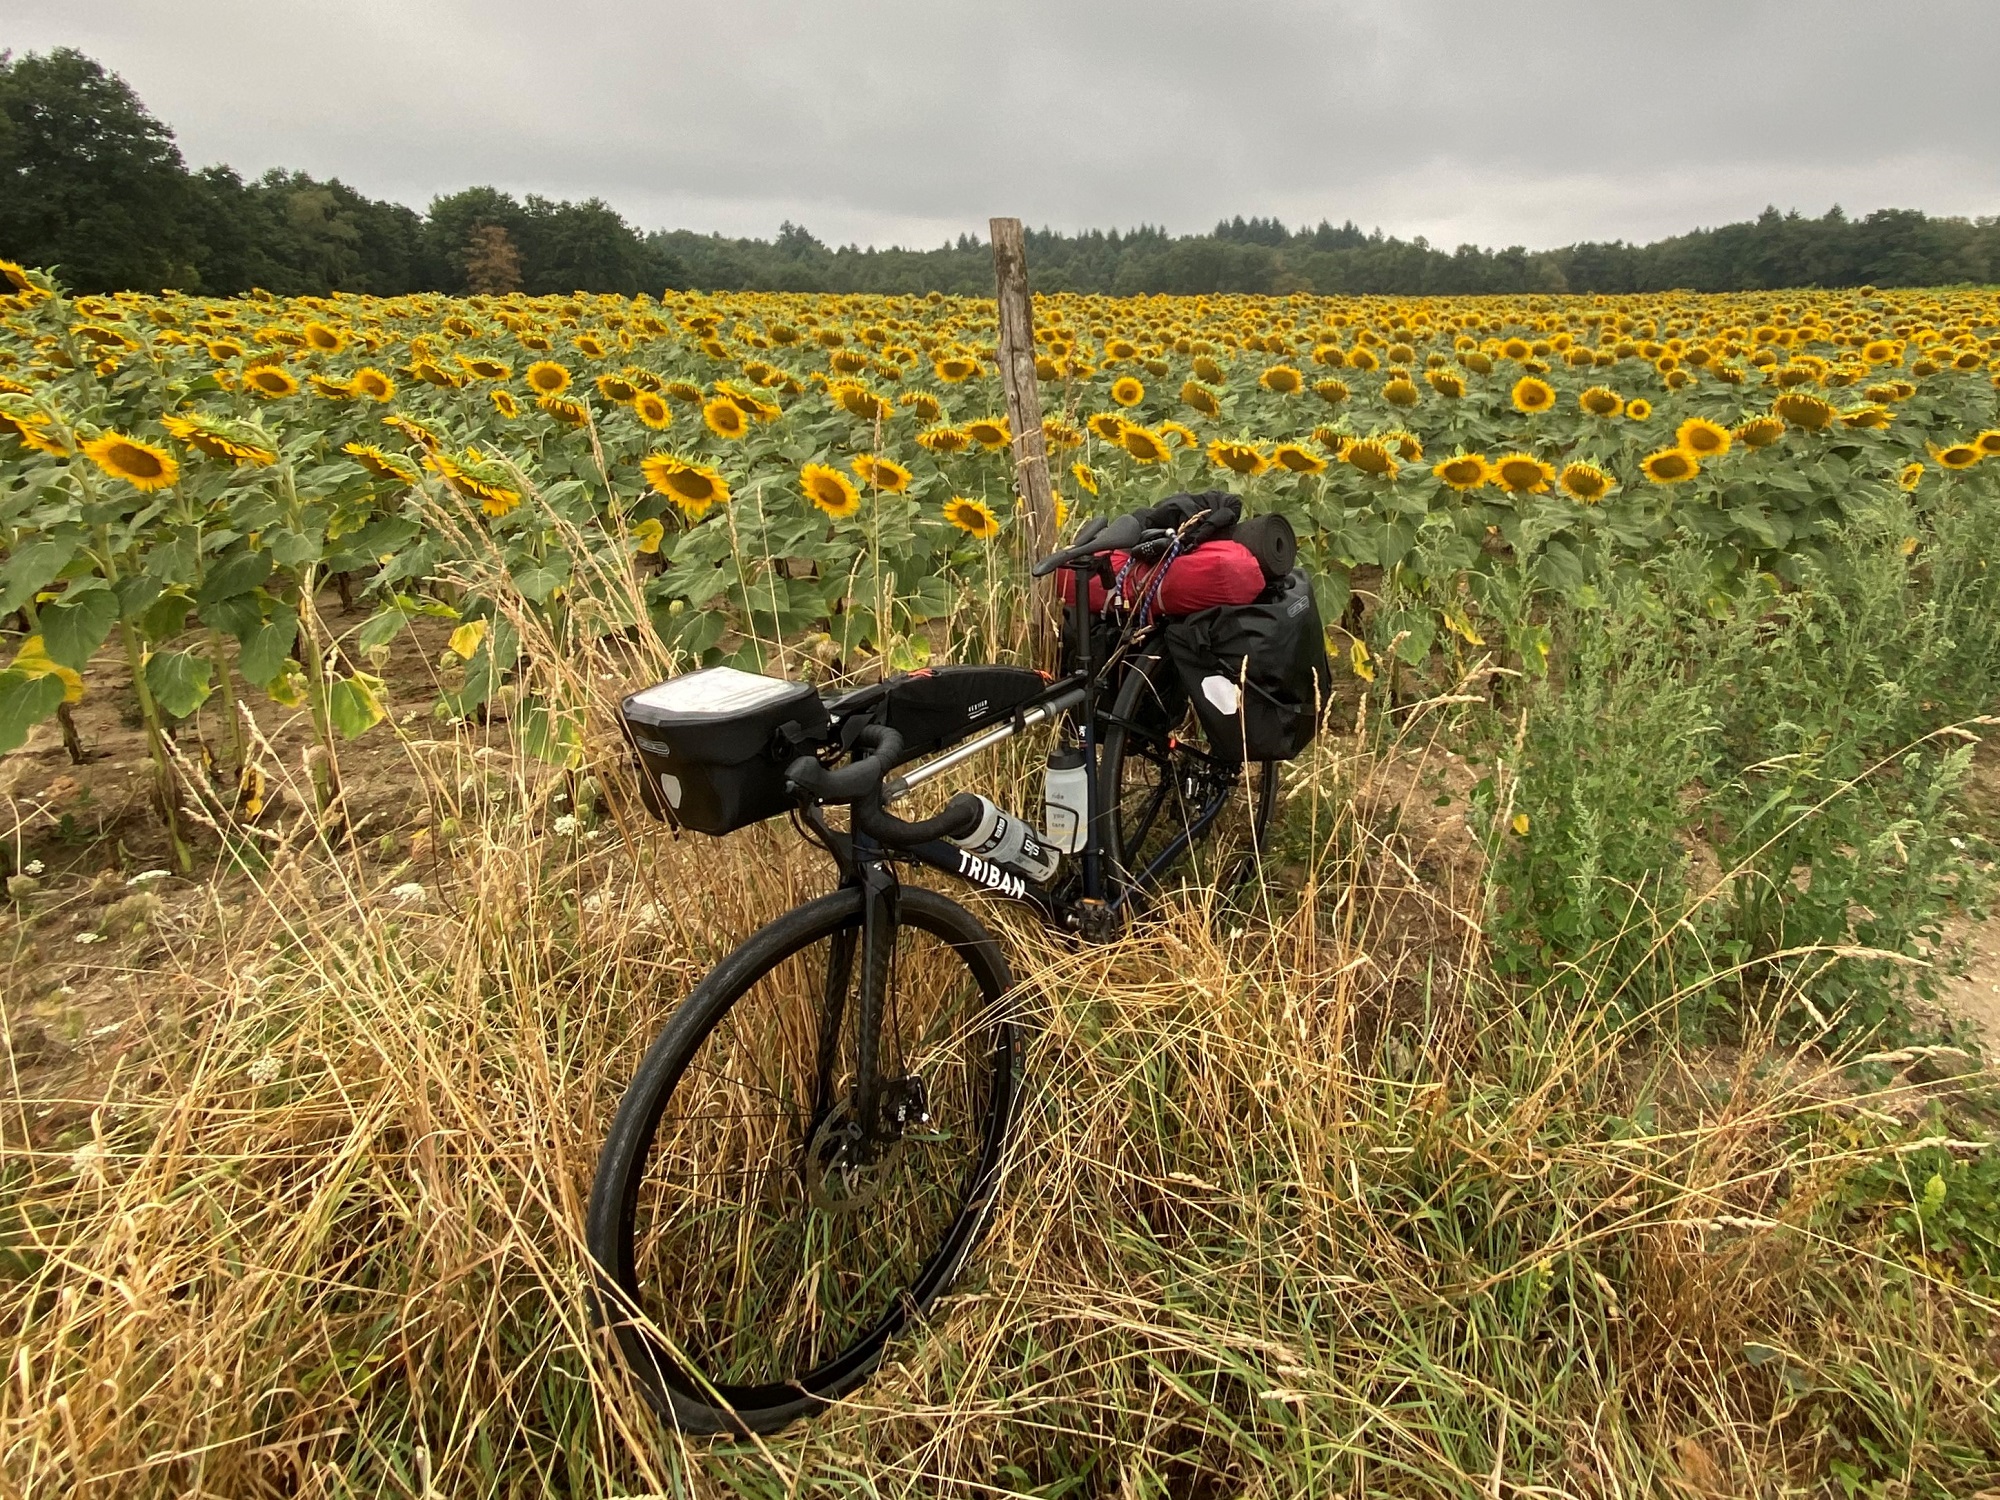 Ortlieb Quick Rack with cargo on a bike against sunflowers